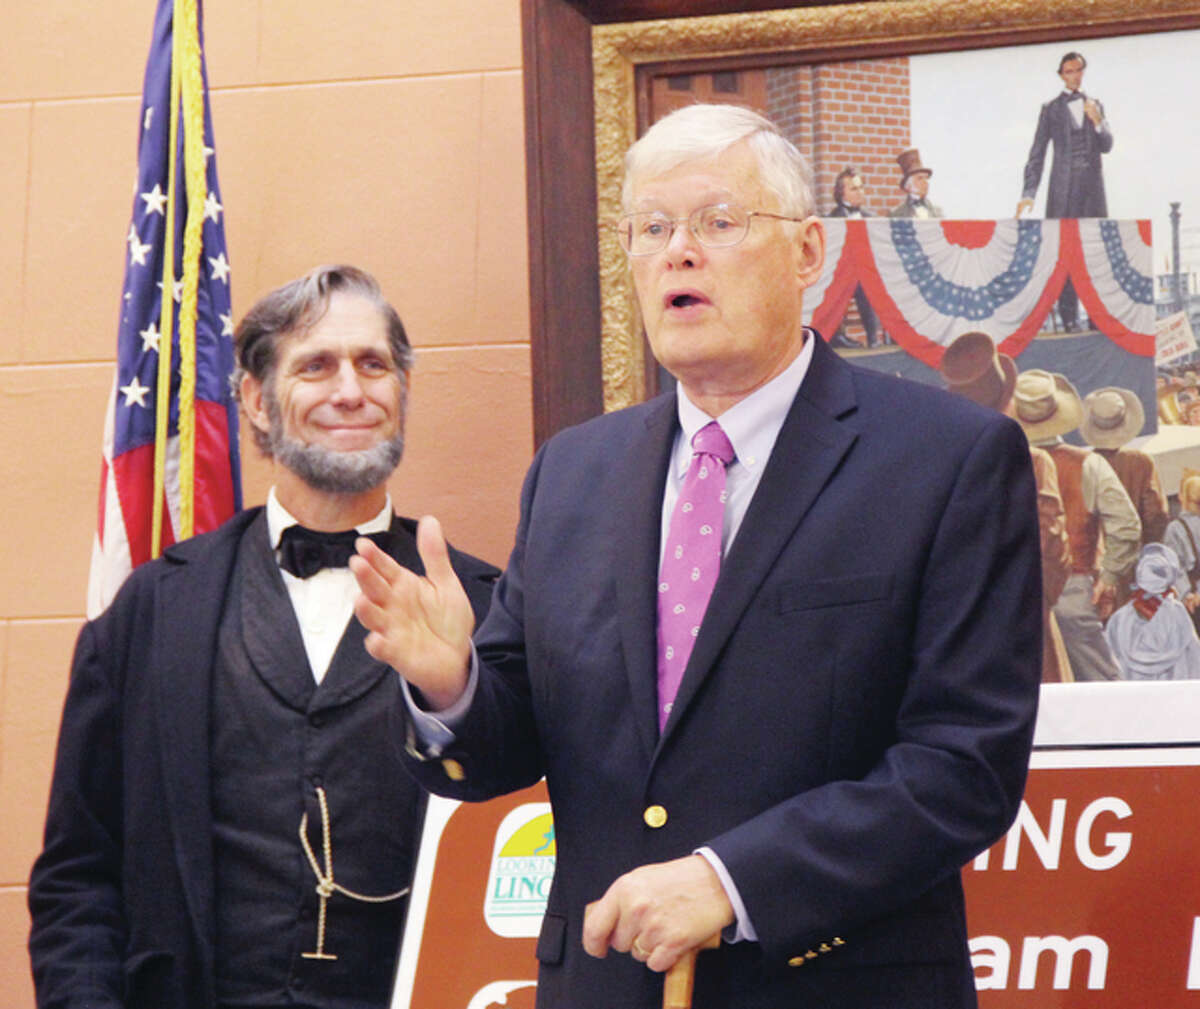 State Sen. Bill Haine (D-Alton) talks about the history of Abraham Lincoln and the abolitionist movement in Alton Wednesday morning as Lincoln impersonator Randy Duncan, of Carlinville looks on. Behind them is a painting showing a younger Lincoln at the Lincoln-Douglas Debate in Alton. Official were at City Hall Wednesday to announce the inclusion of Alton as one of six Gateway Cities to the Abraham Lincoln National Heritage Area in Illinois.